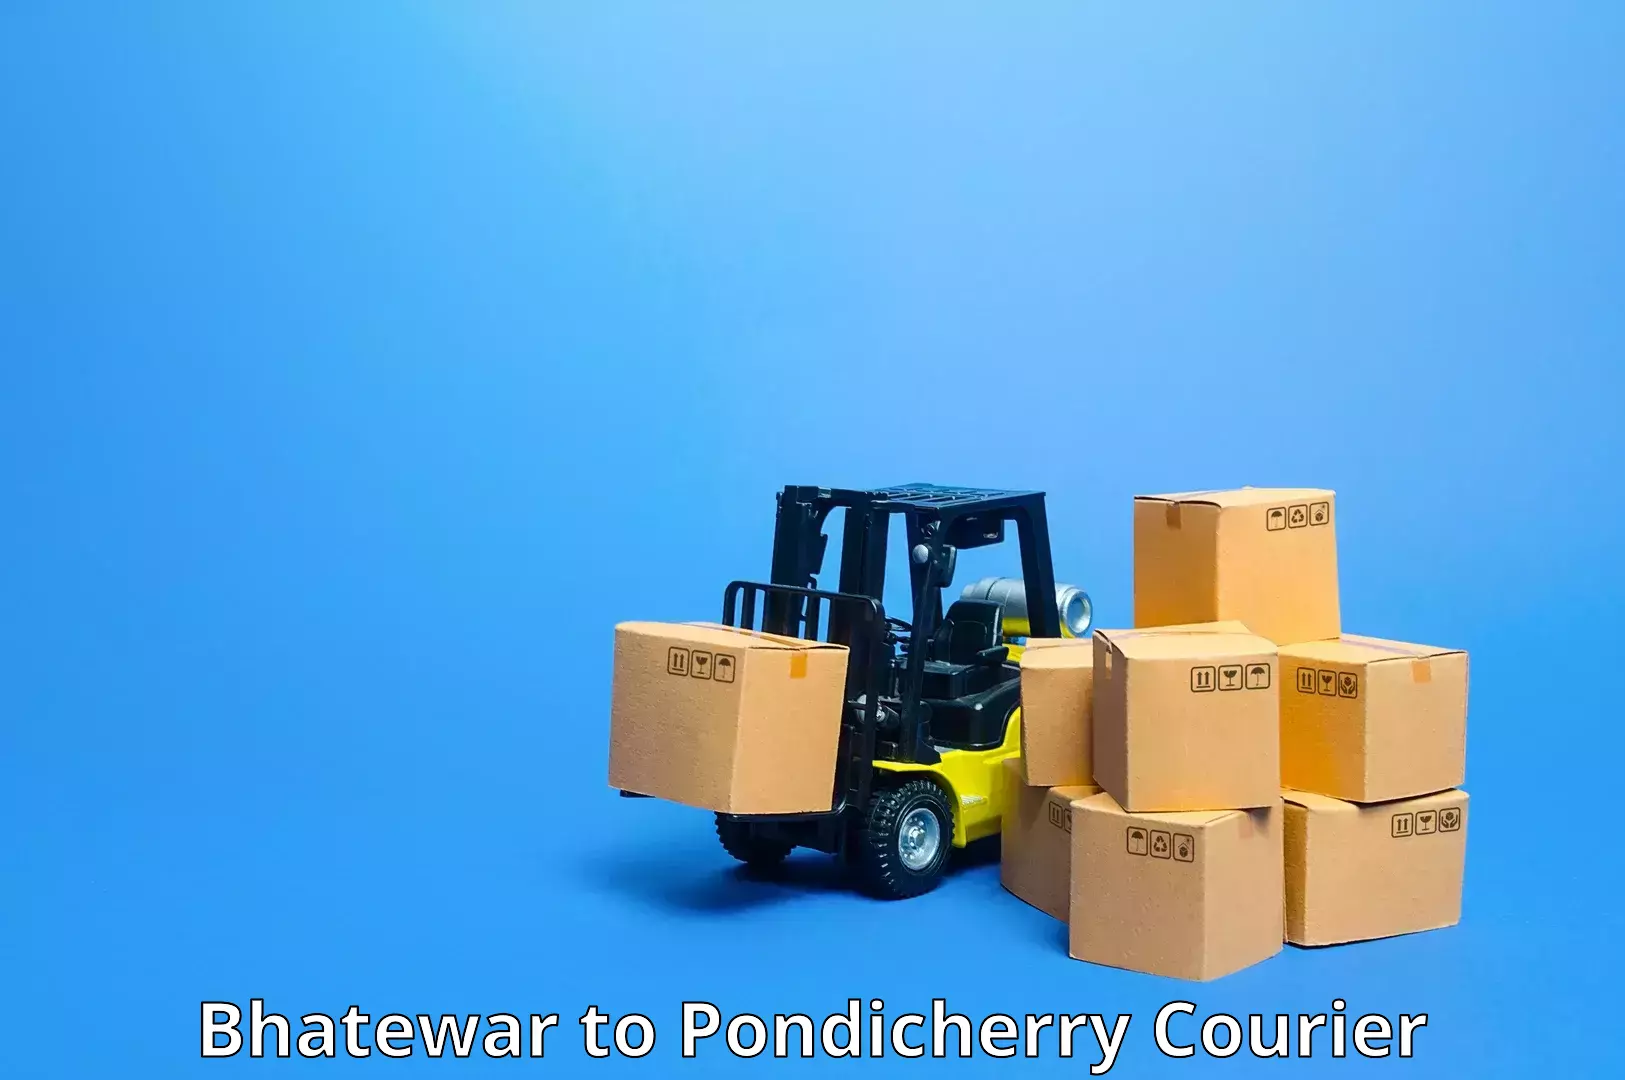 Package delivery network Bhatewar to Pondicherry